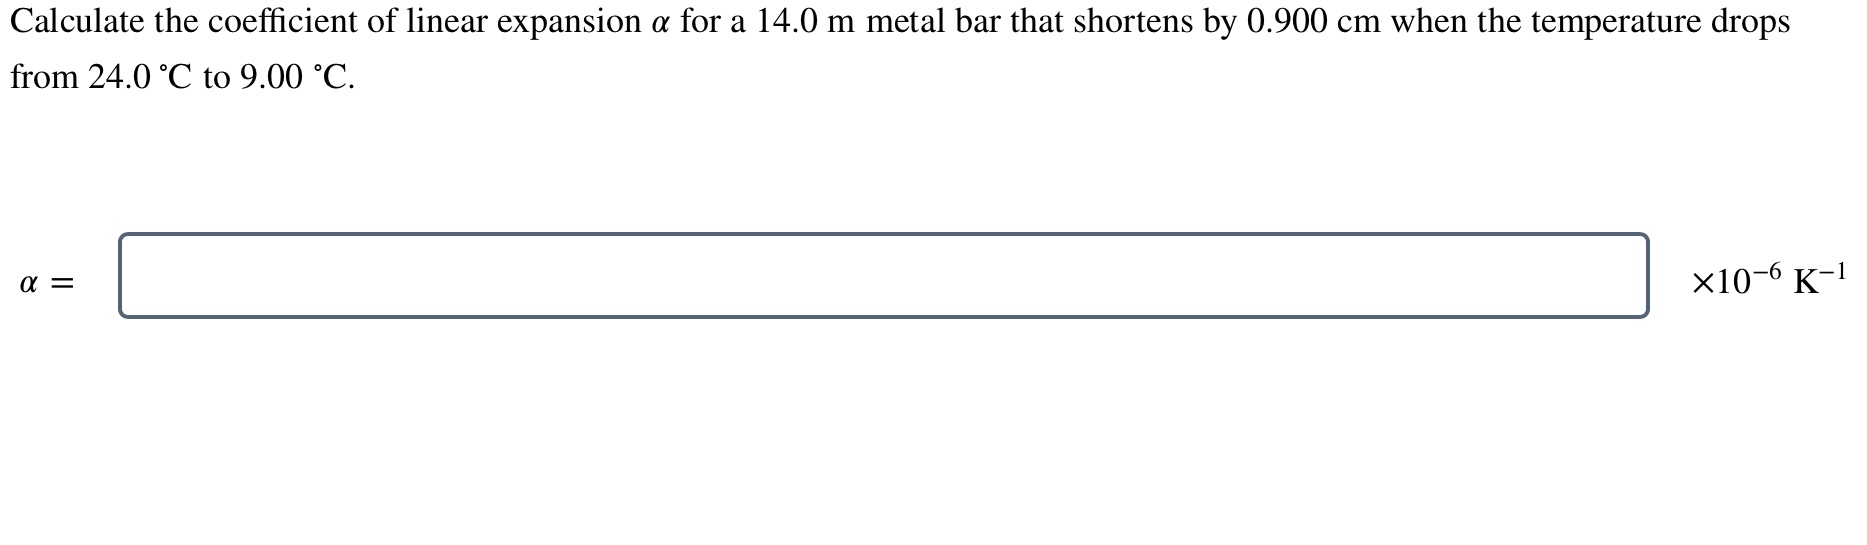 Calculate the coefficient of linear expansion a for a 14.0 m metal bar that shortens by 0.900 cm when the